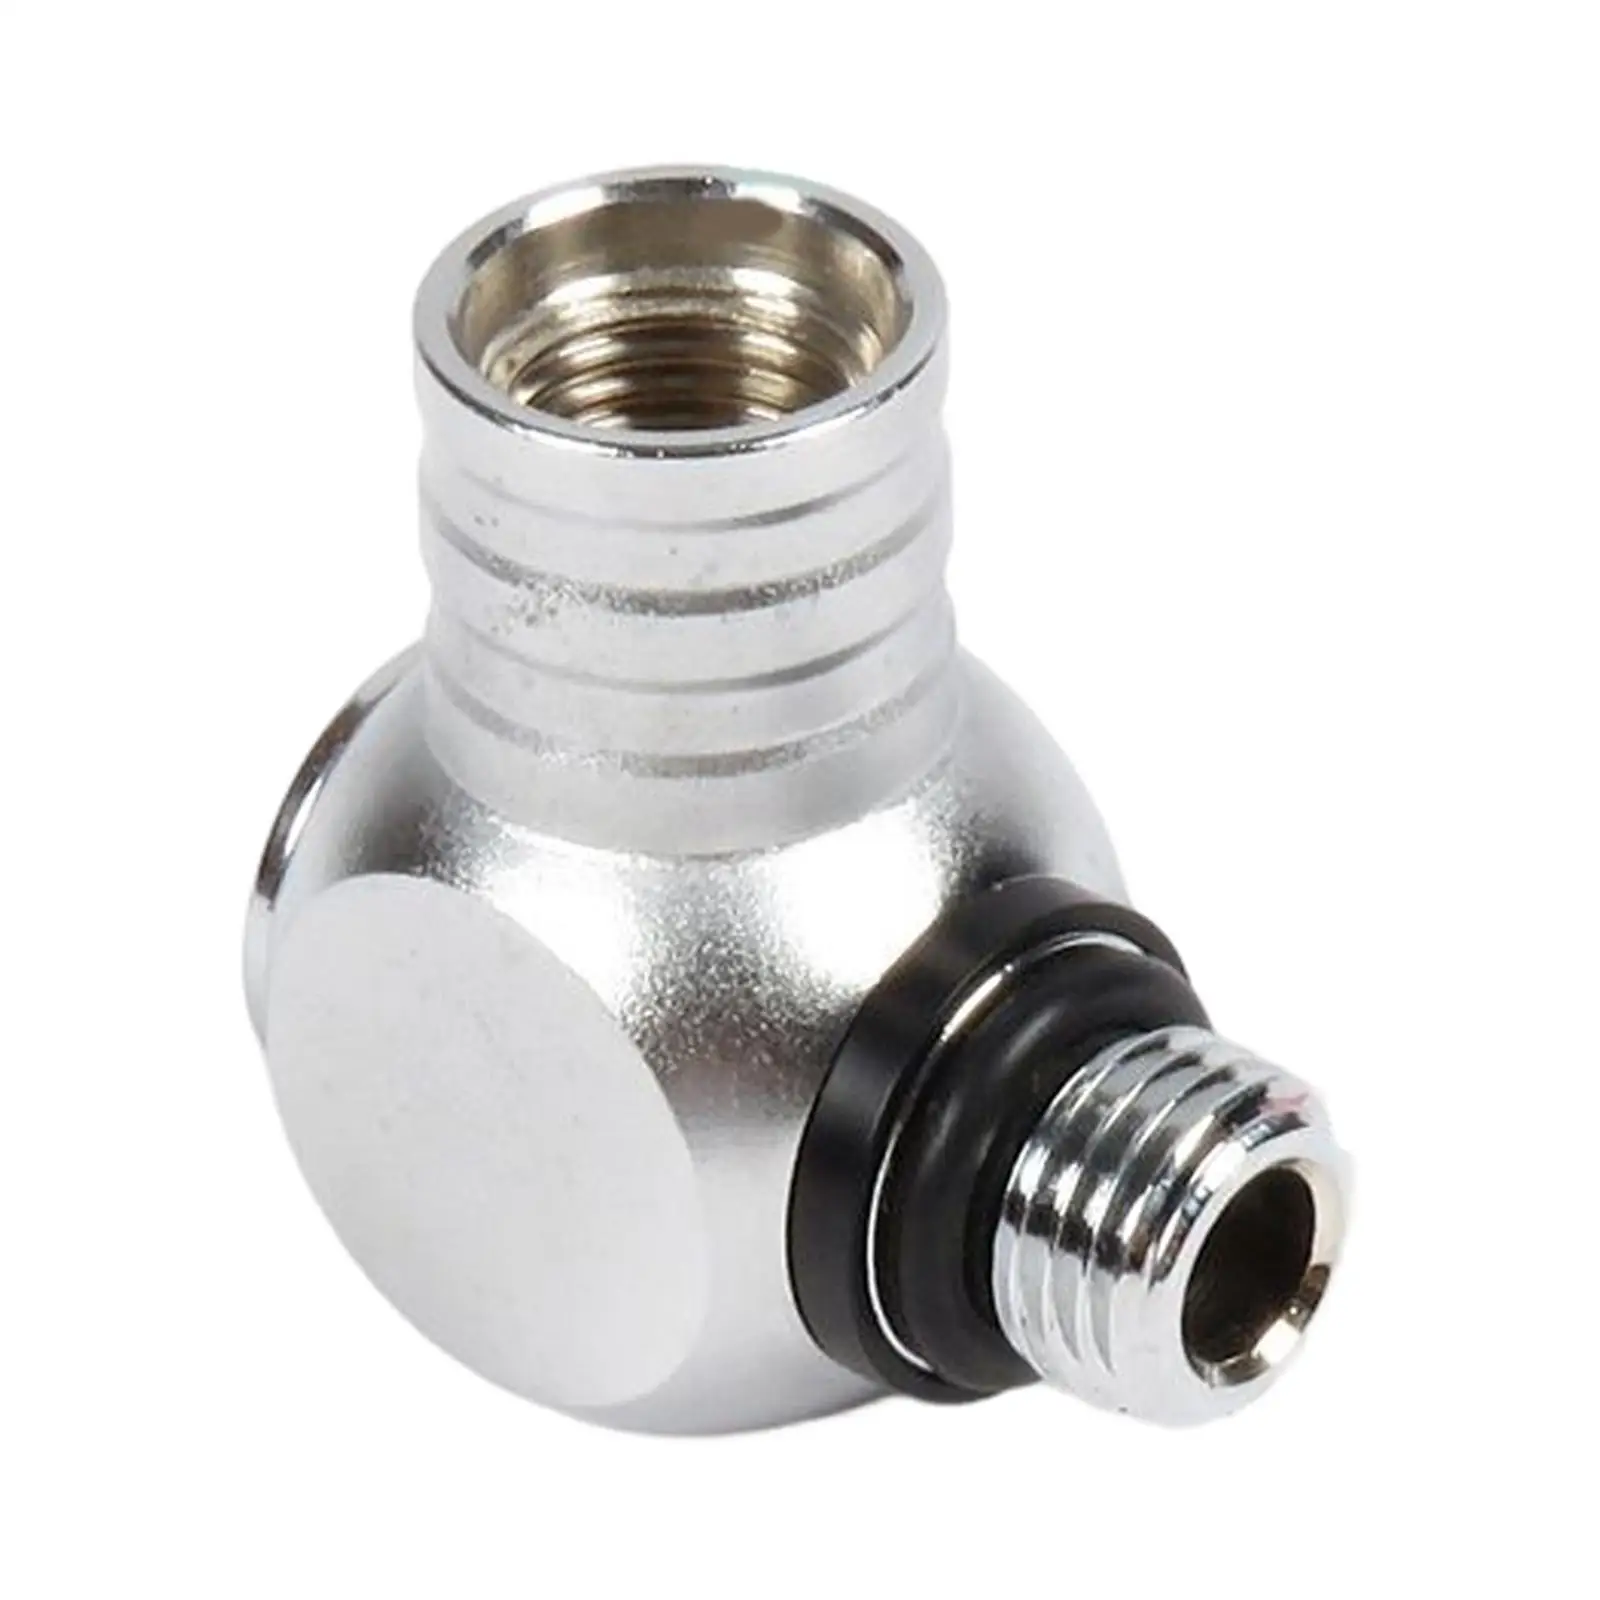 

Regulator Hose Adapter Rotation Connector 1st Stage LP/HP Accessories Rotation for Scuba Diving Brass